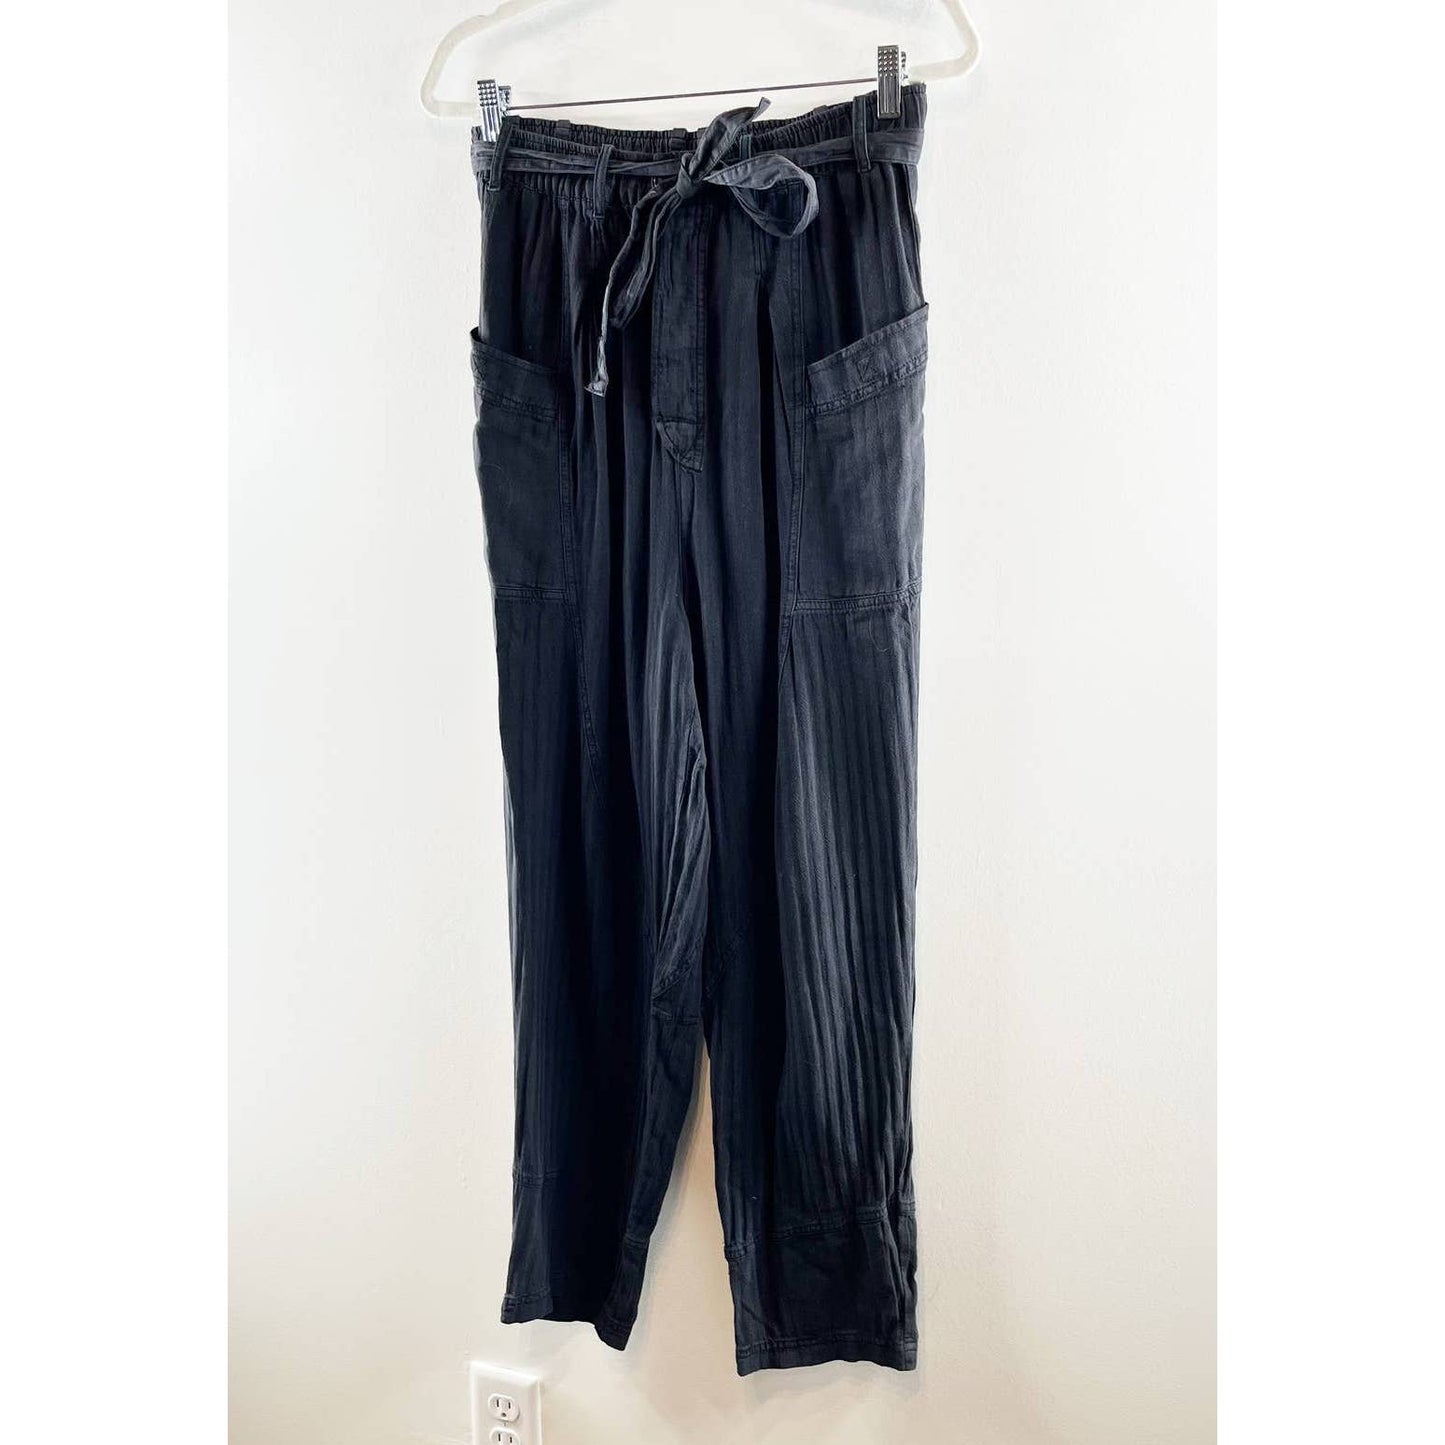 Free People Livin In The City Belted Casual Cotton Pants Black Small